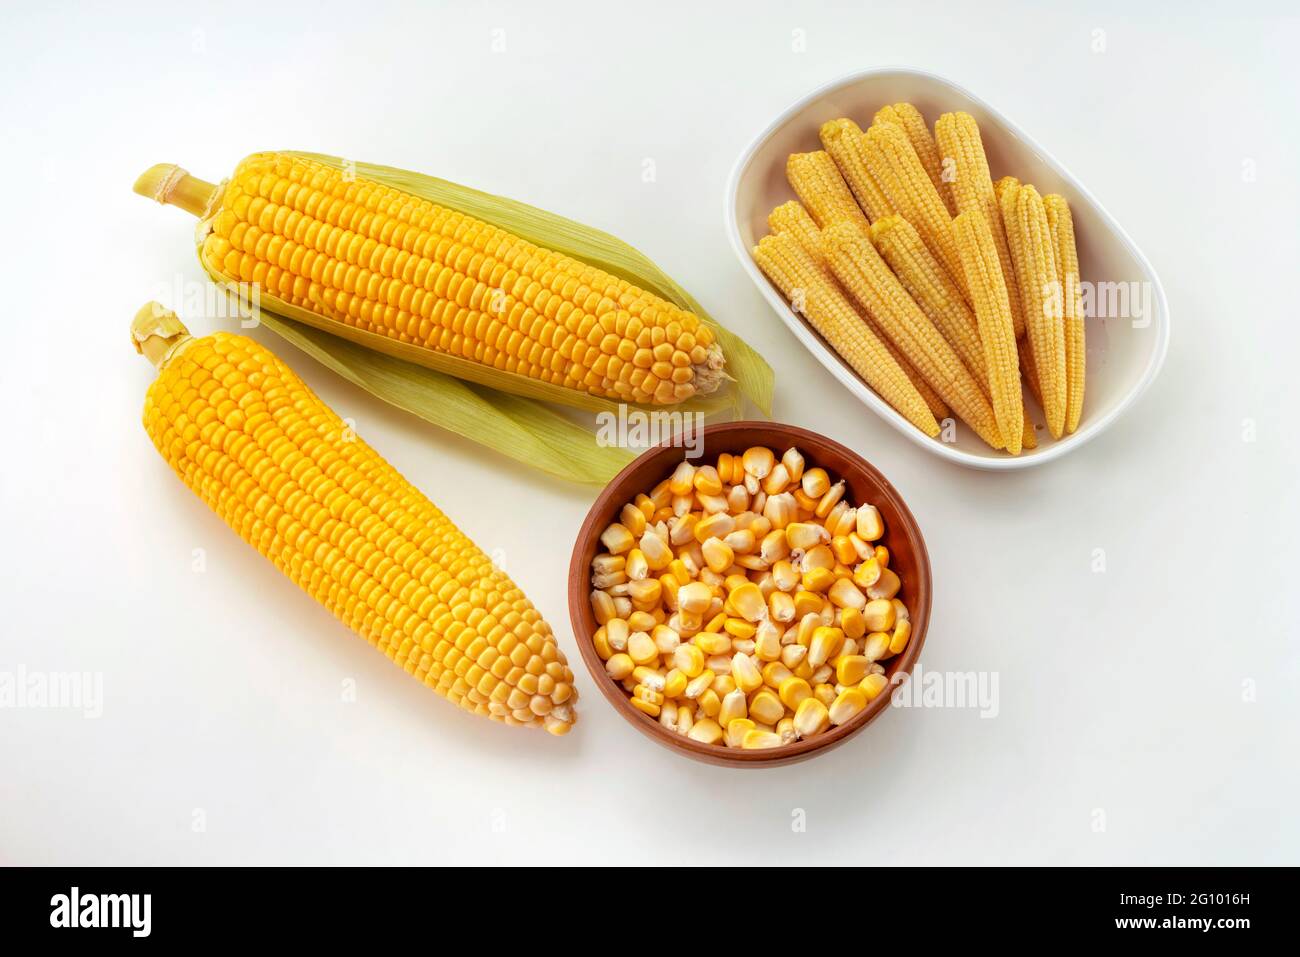 Closeup top view of two Sweet Corns,Maize,Zea Mays,with baby corns in white dish and seeds in wooden bowl against  white background . Stock Photo